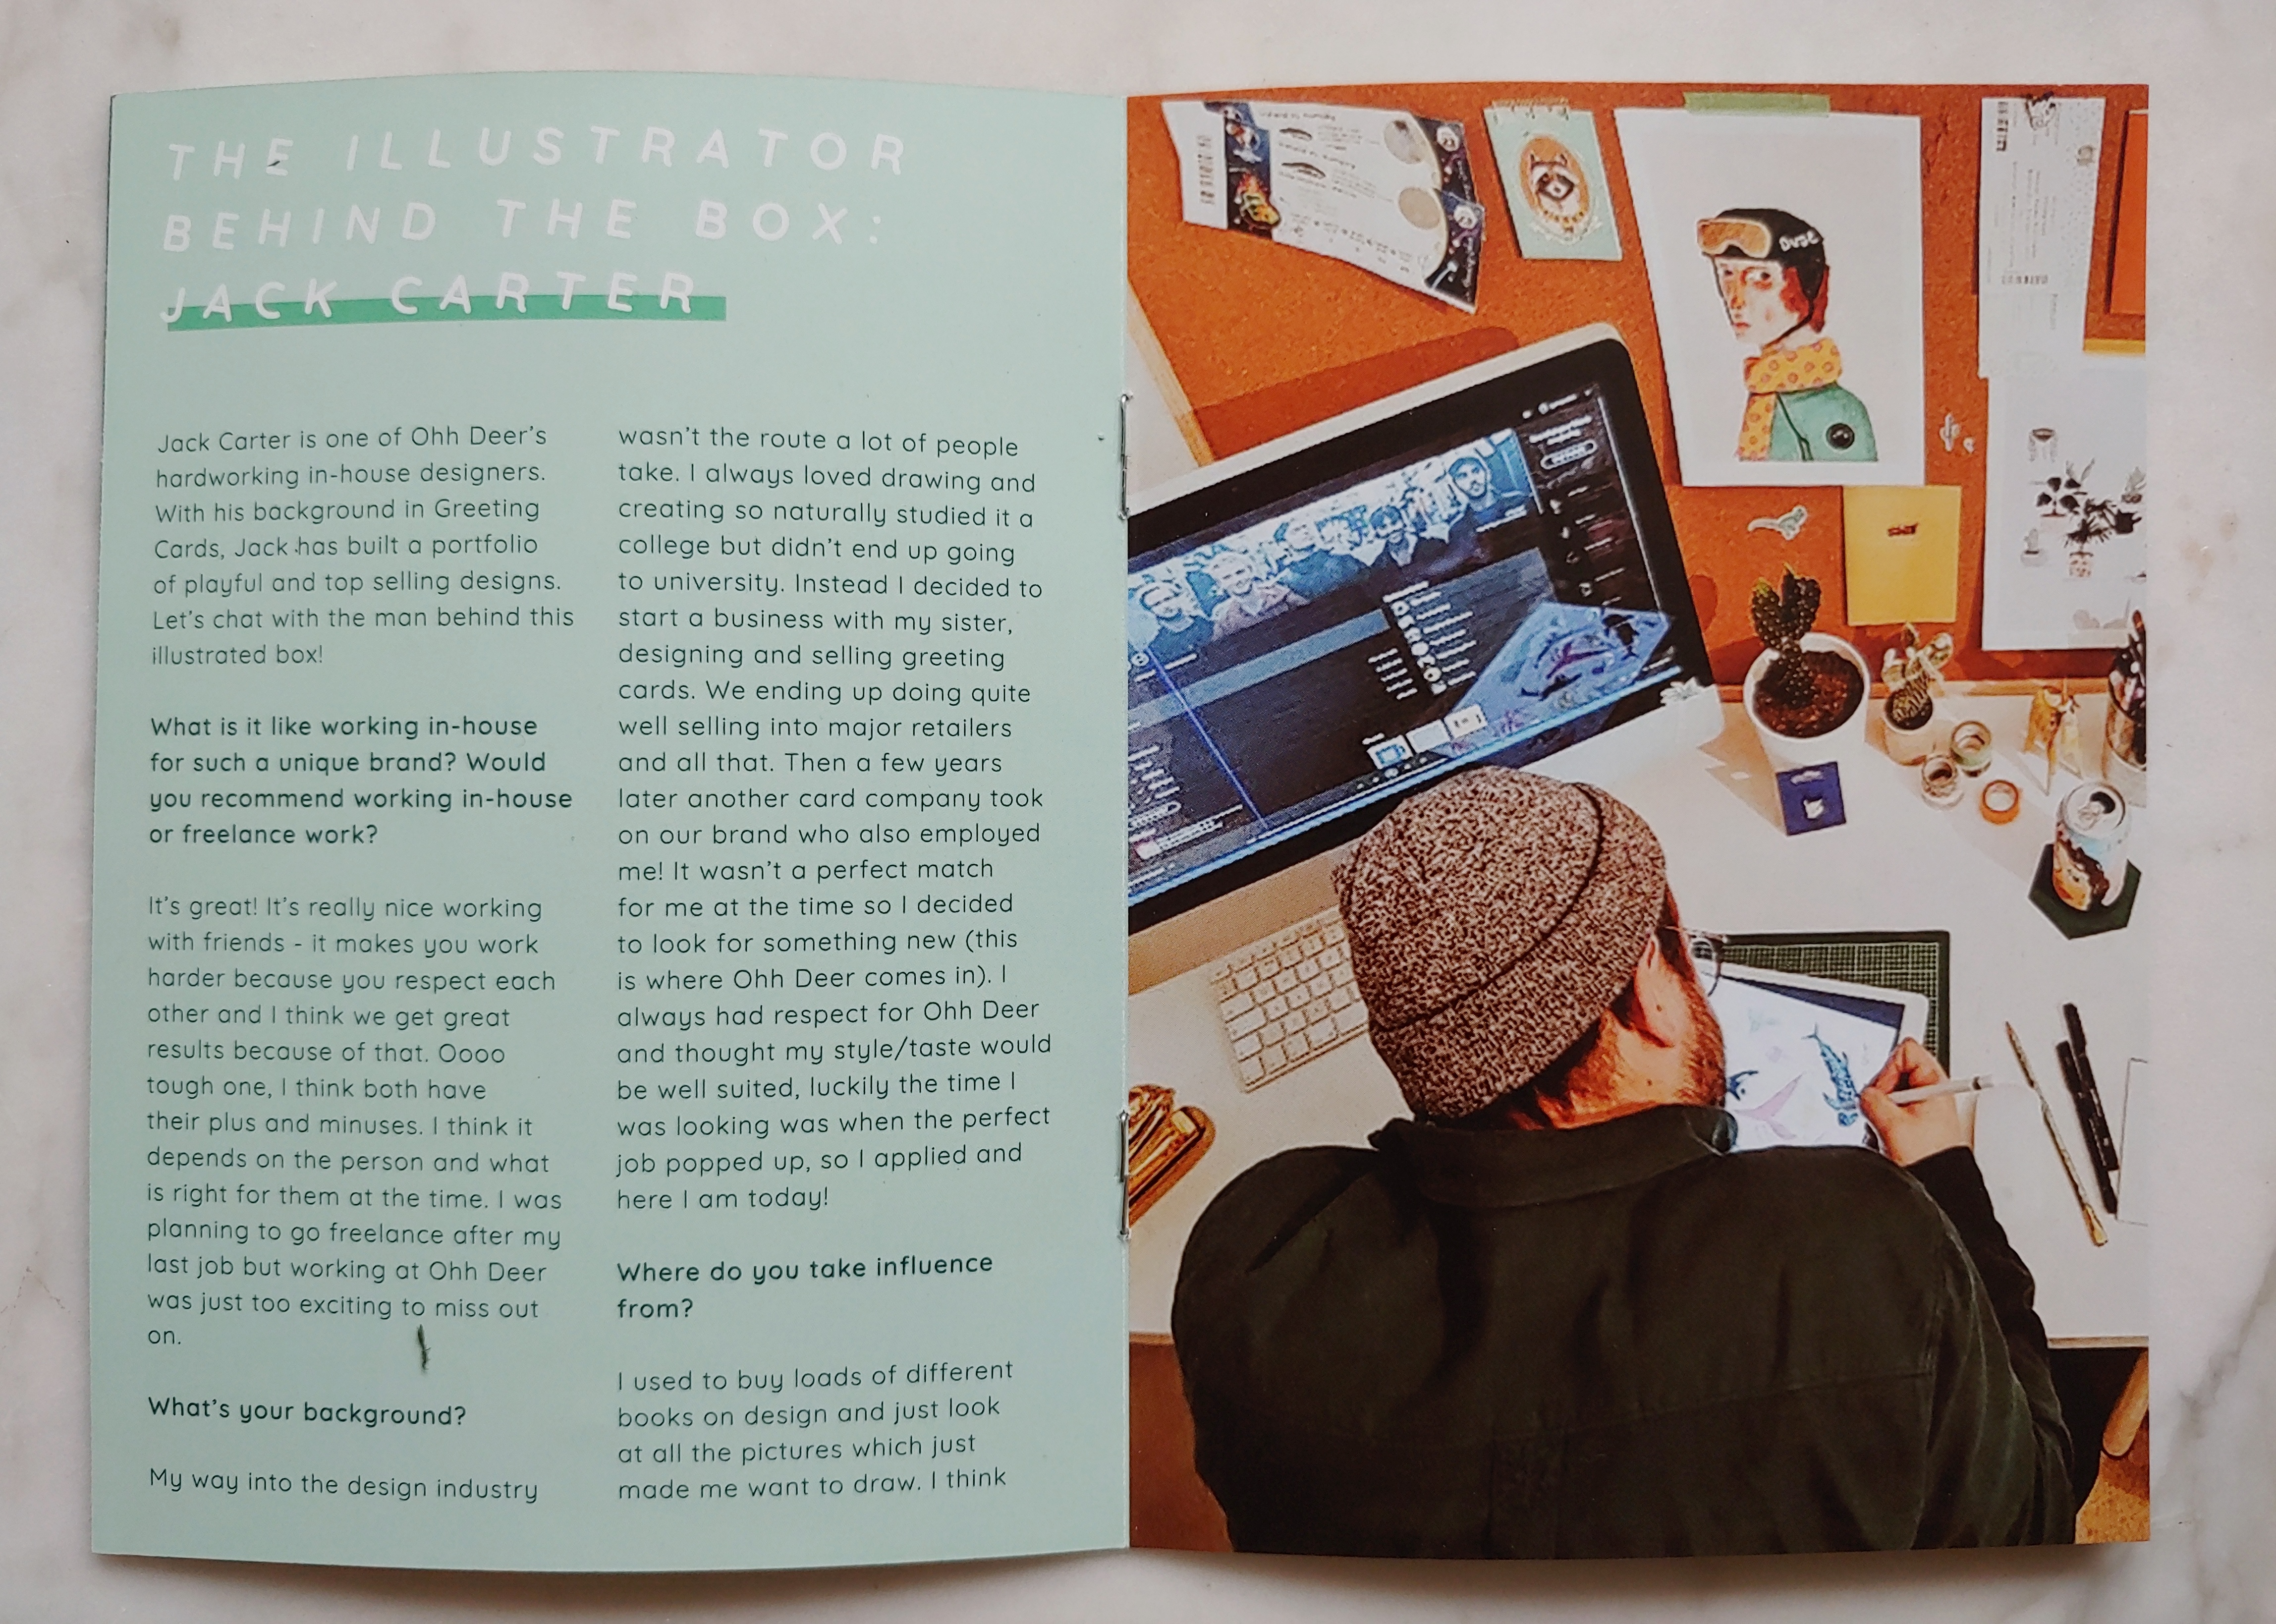 Image of the leaflet, with interview page and photo of Jack Carter drawing